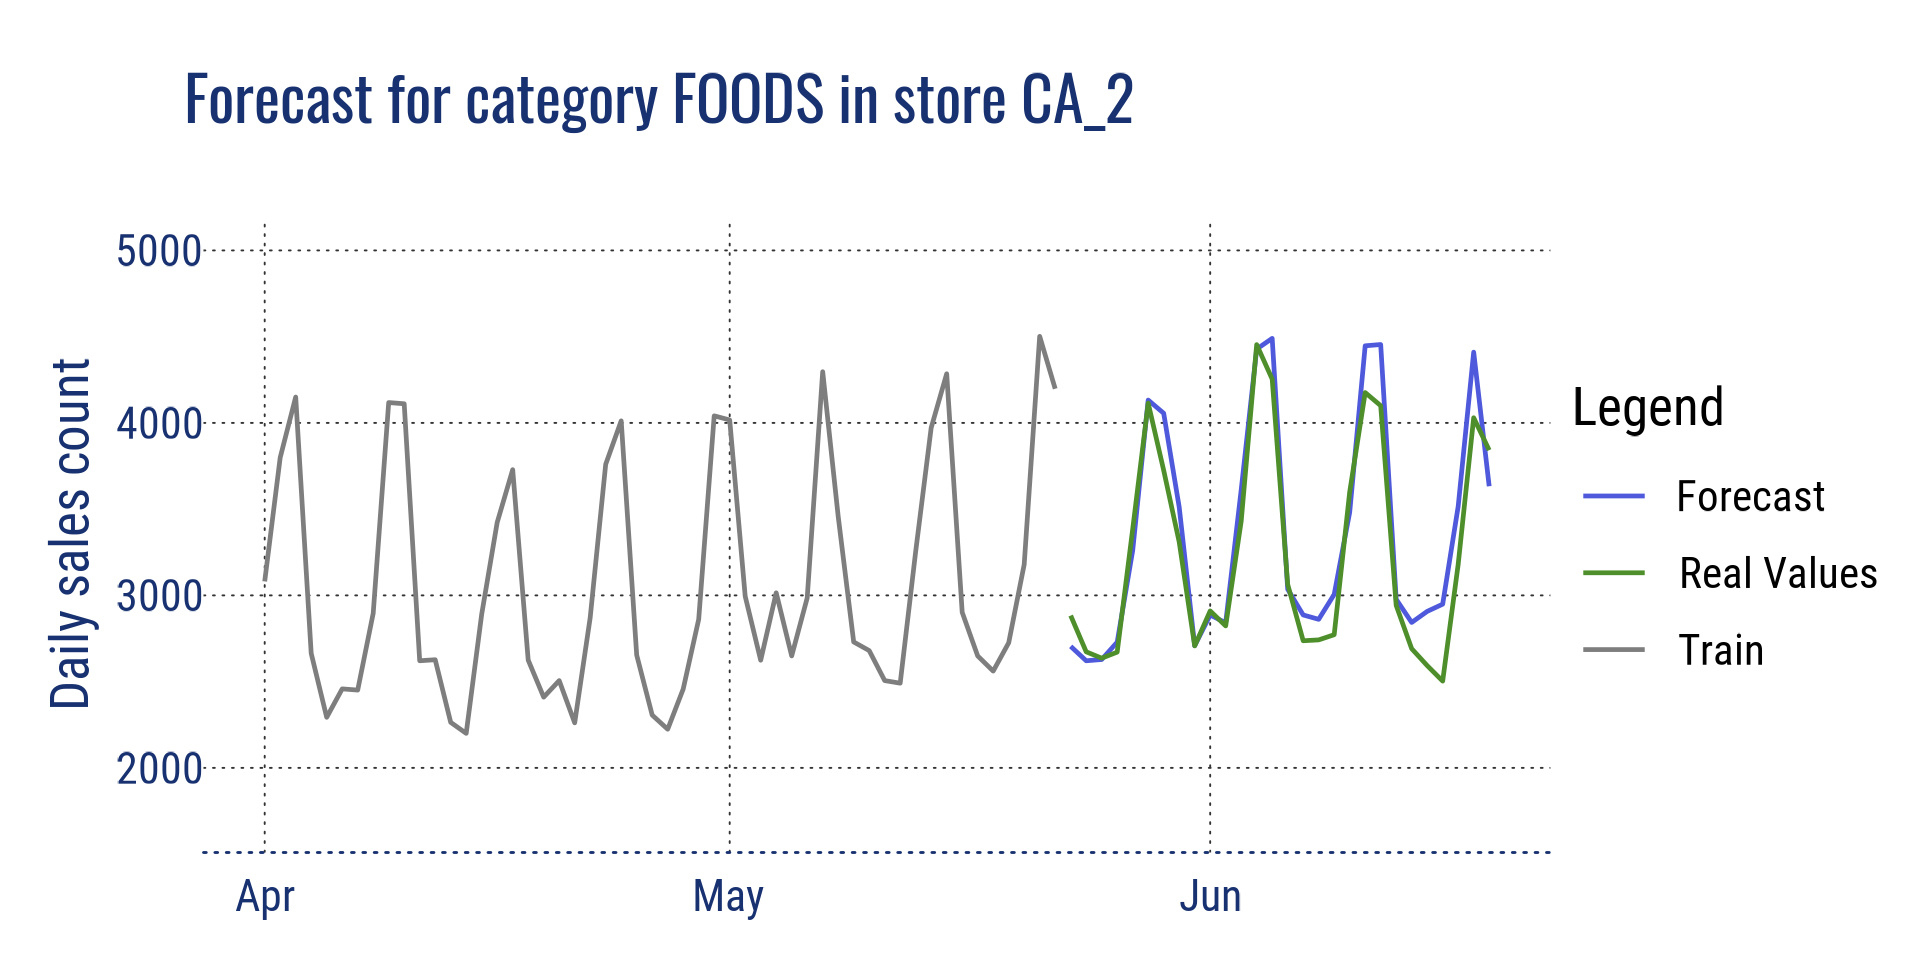 Forecast for category FOODS in the store CA_2